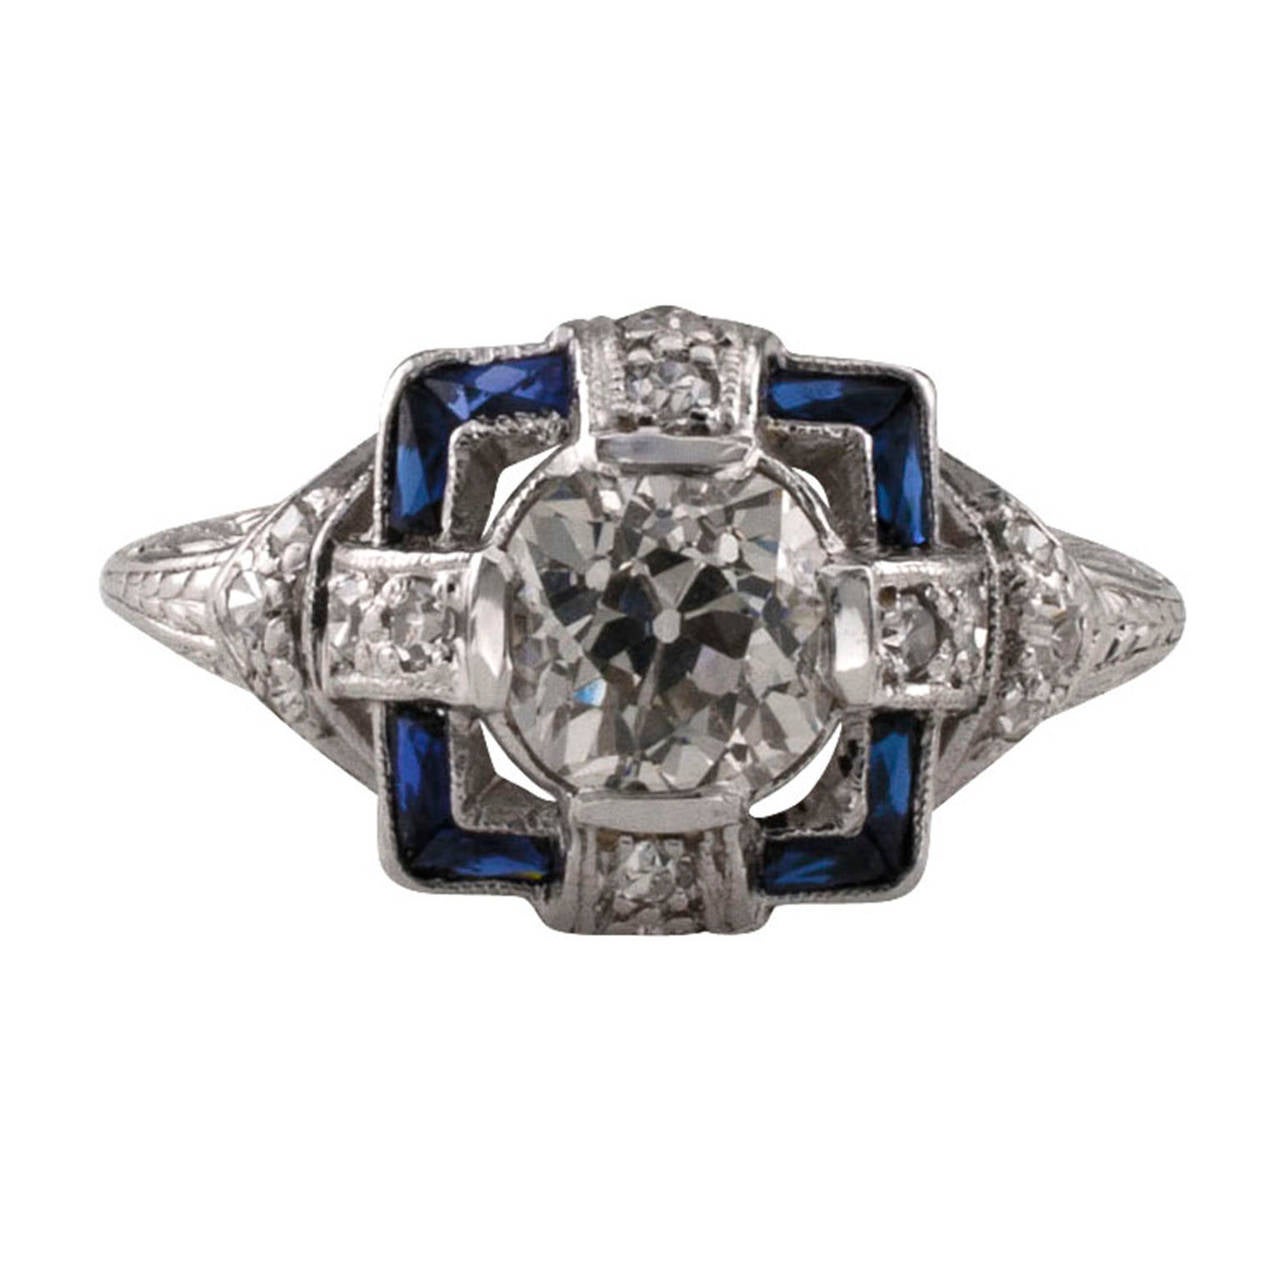 Circa 1925, this lovely Art Deco engagement ring centers upon an old European-cut diamond weighing 0.92 carat, accompanied by a report from EGL-USA stating that the diamond is H color and SI1 clarity, surmounted on a rectangular motif set with